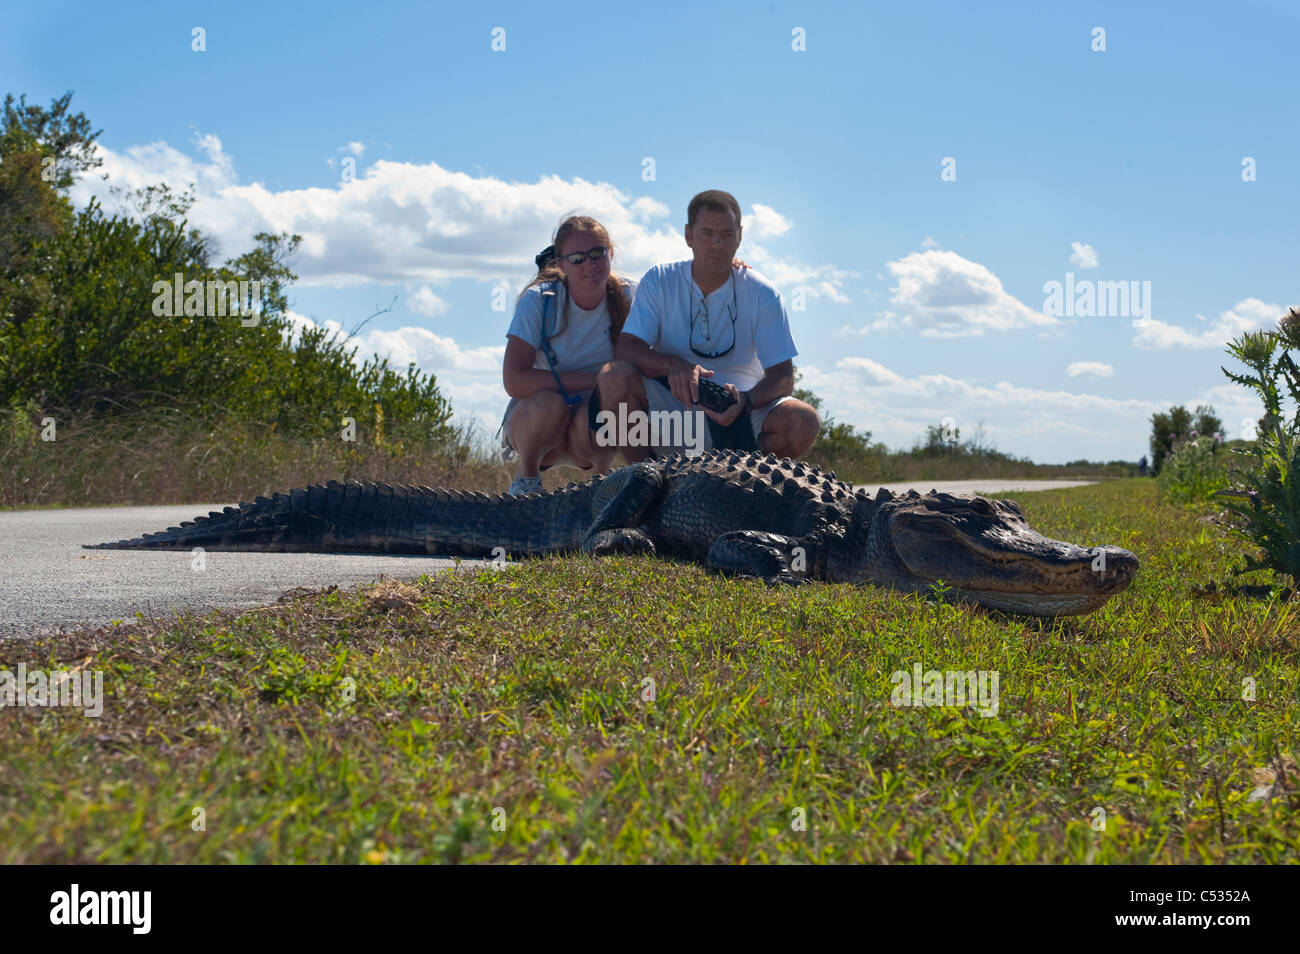 Tourists watch an American Alligator (Alligator mississippiensis) basking in the sun in Everglades National Park, Florida. Stock Photo